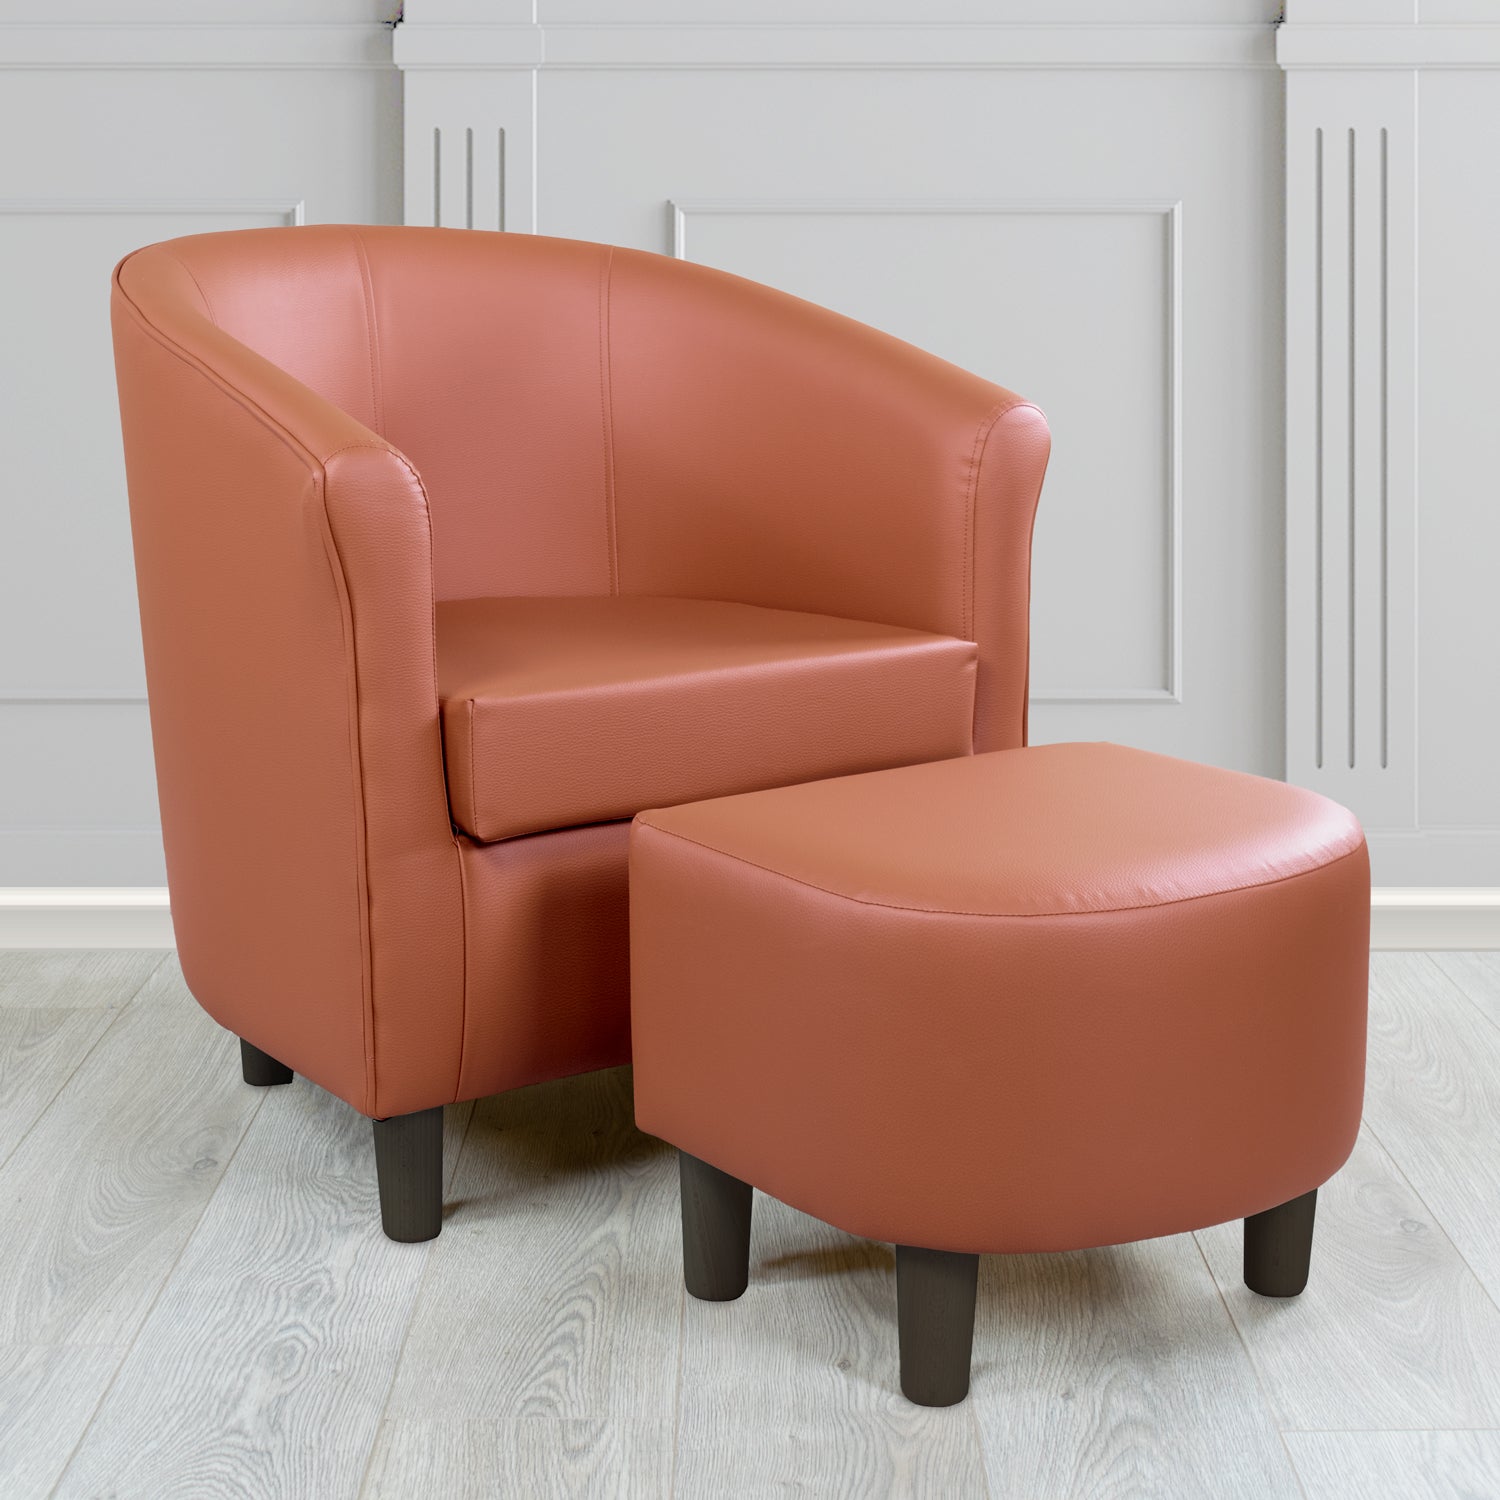 Tuscany Just Colour Rusty Faux Leather Tub Chair with Footstool Set - The Tub Chair Shop